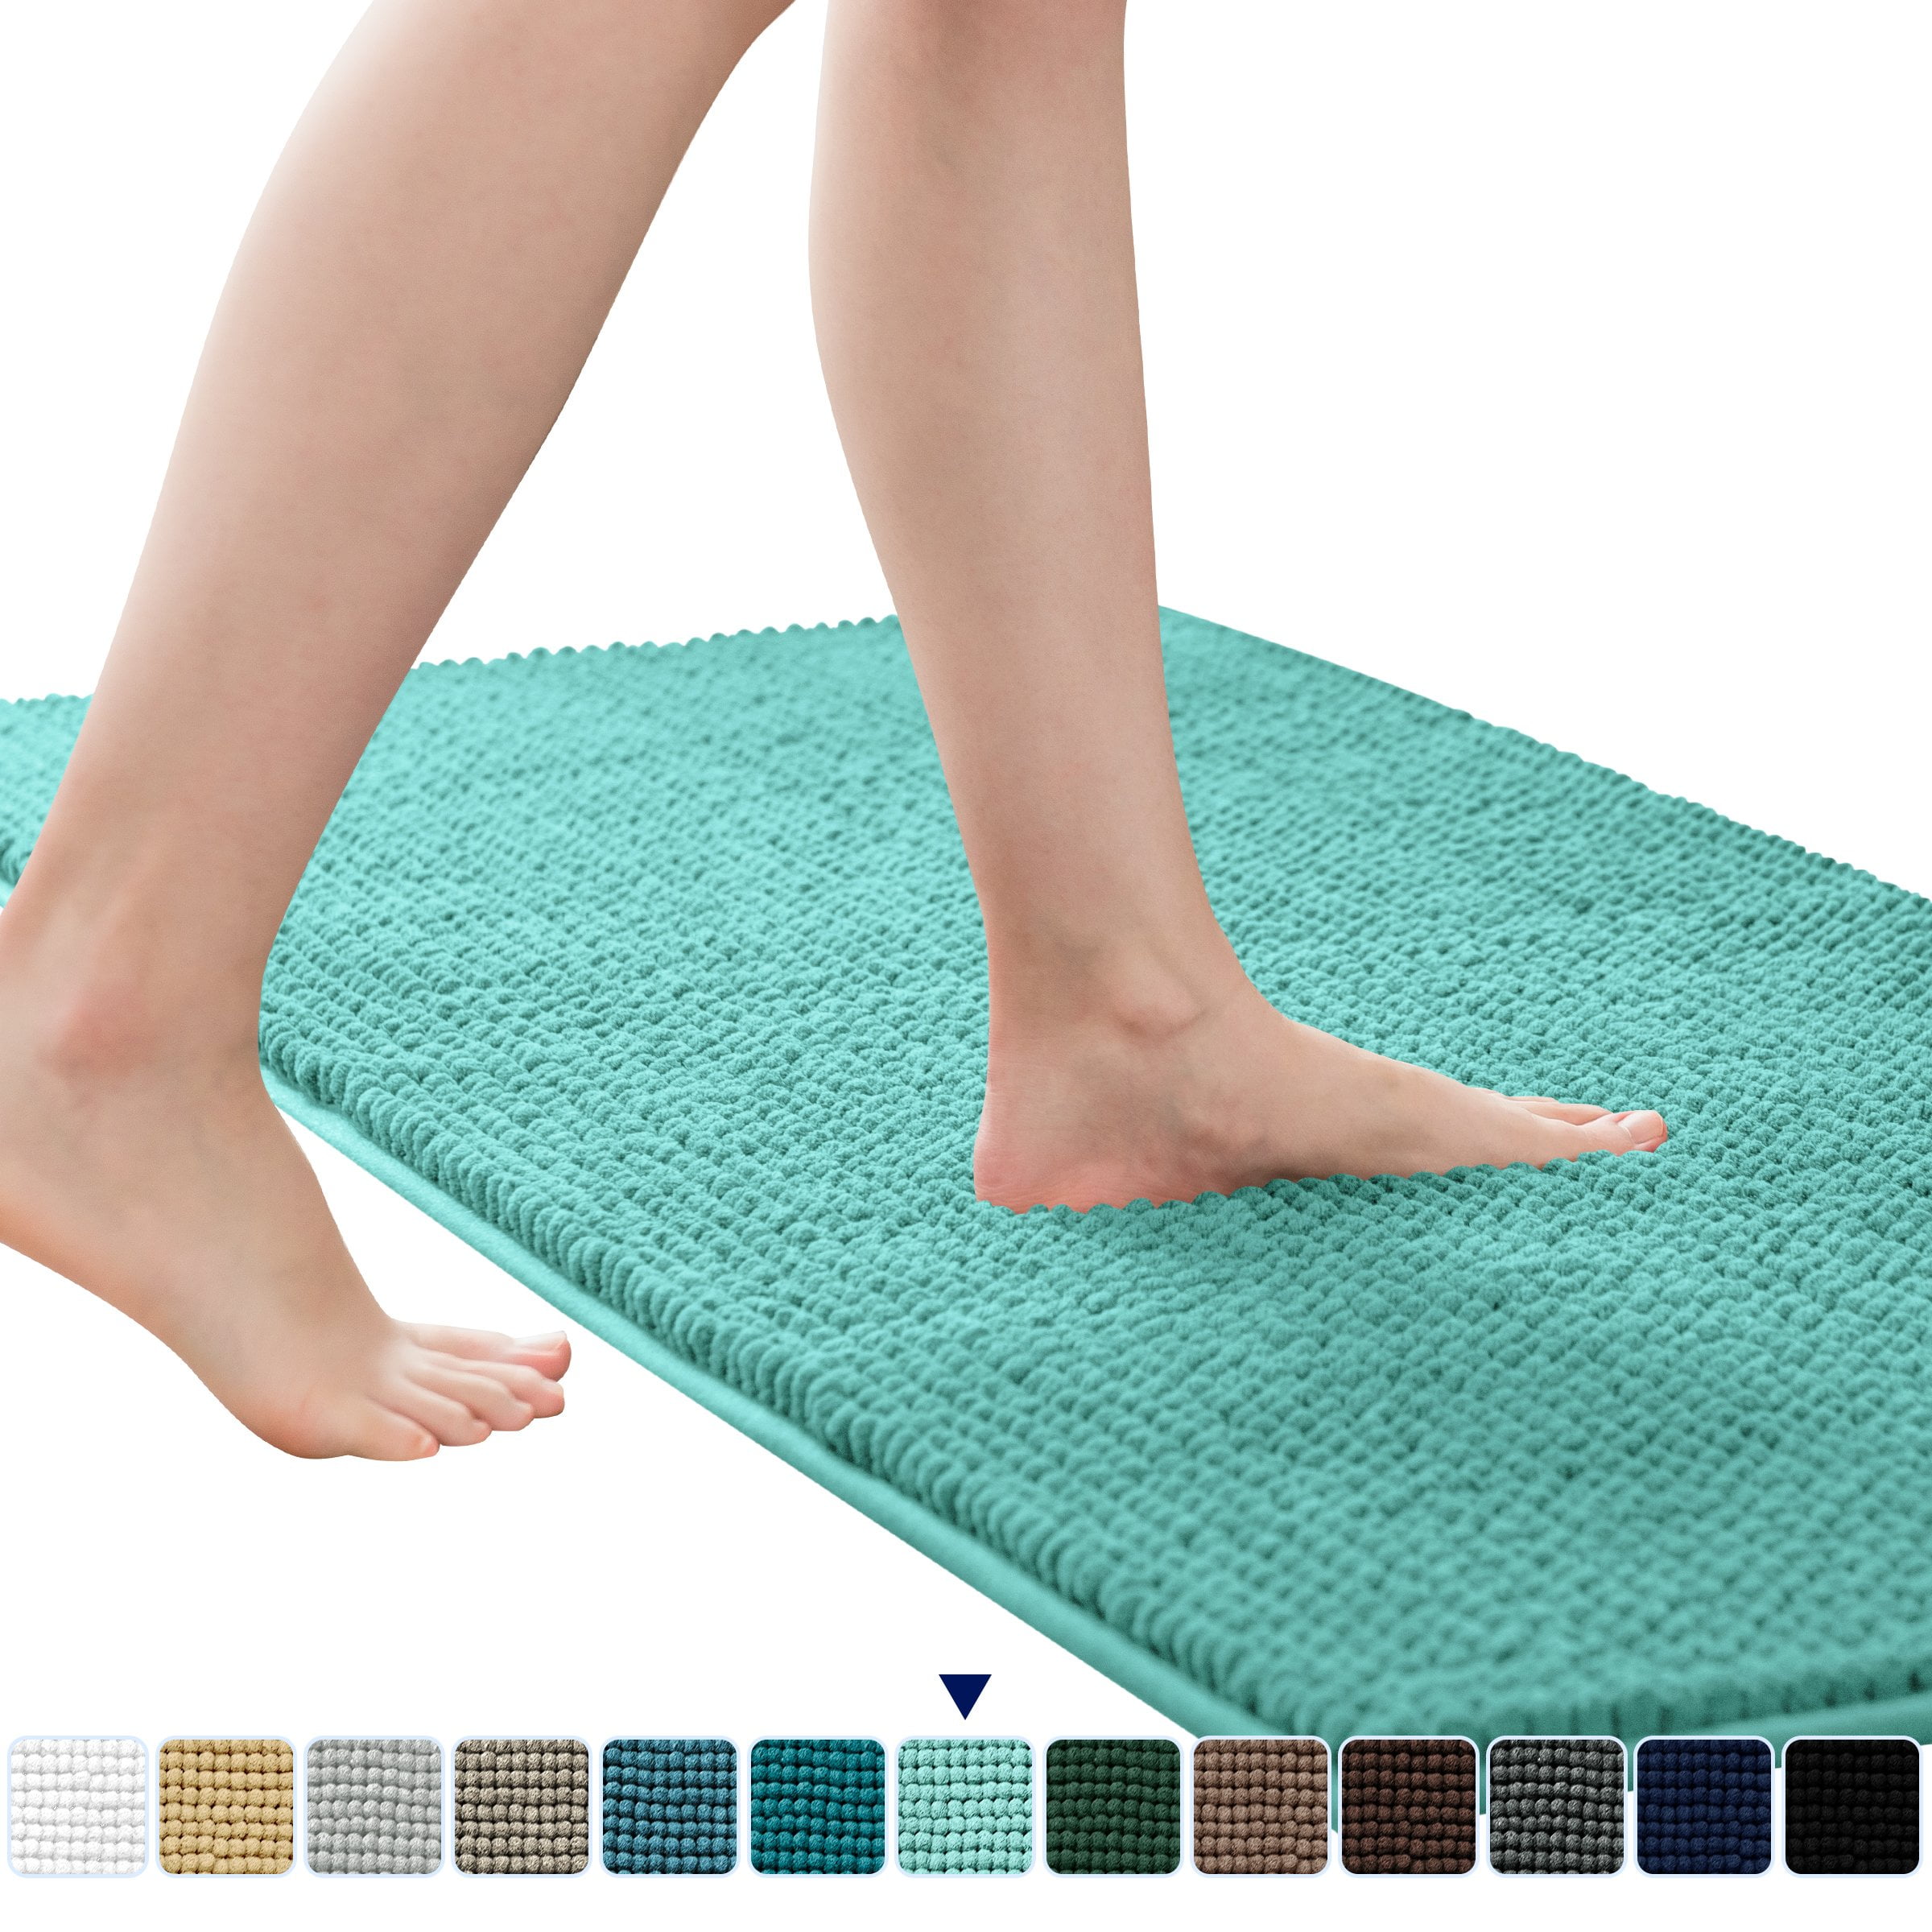 Large Bathroom Rugs (24 x 60) Extra Soft and Absorbent Shaggy Bathroom Mat